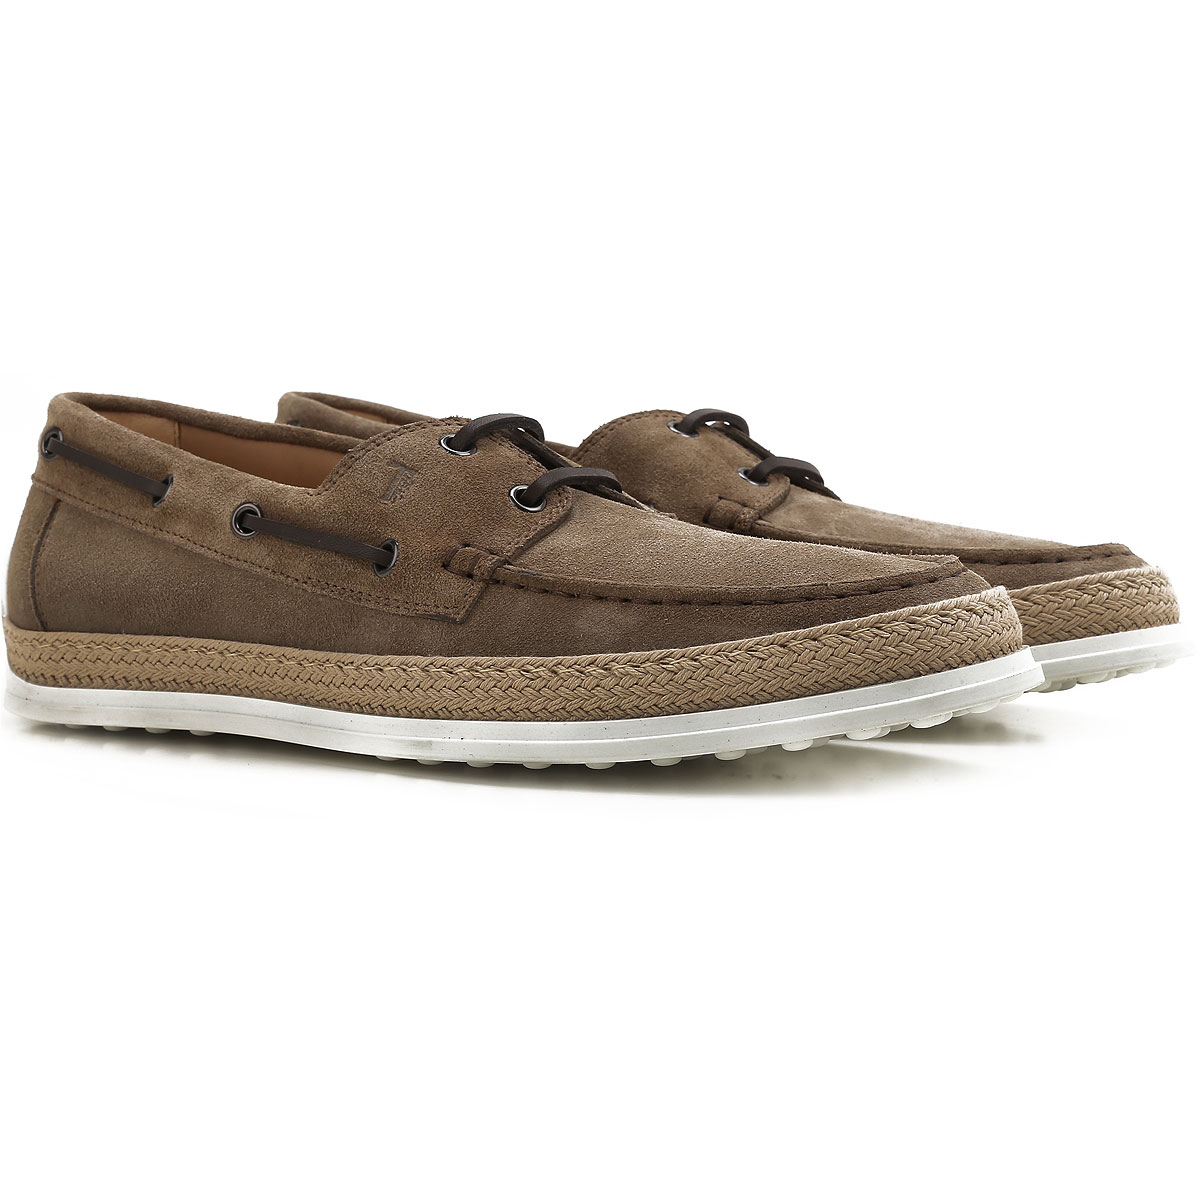 Tod's Chaussure Bateau Homme, Chaussures Dockside, Taupe, Daim, 2017, 39.5 40 41 41.5 42 43 44.5